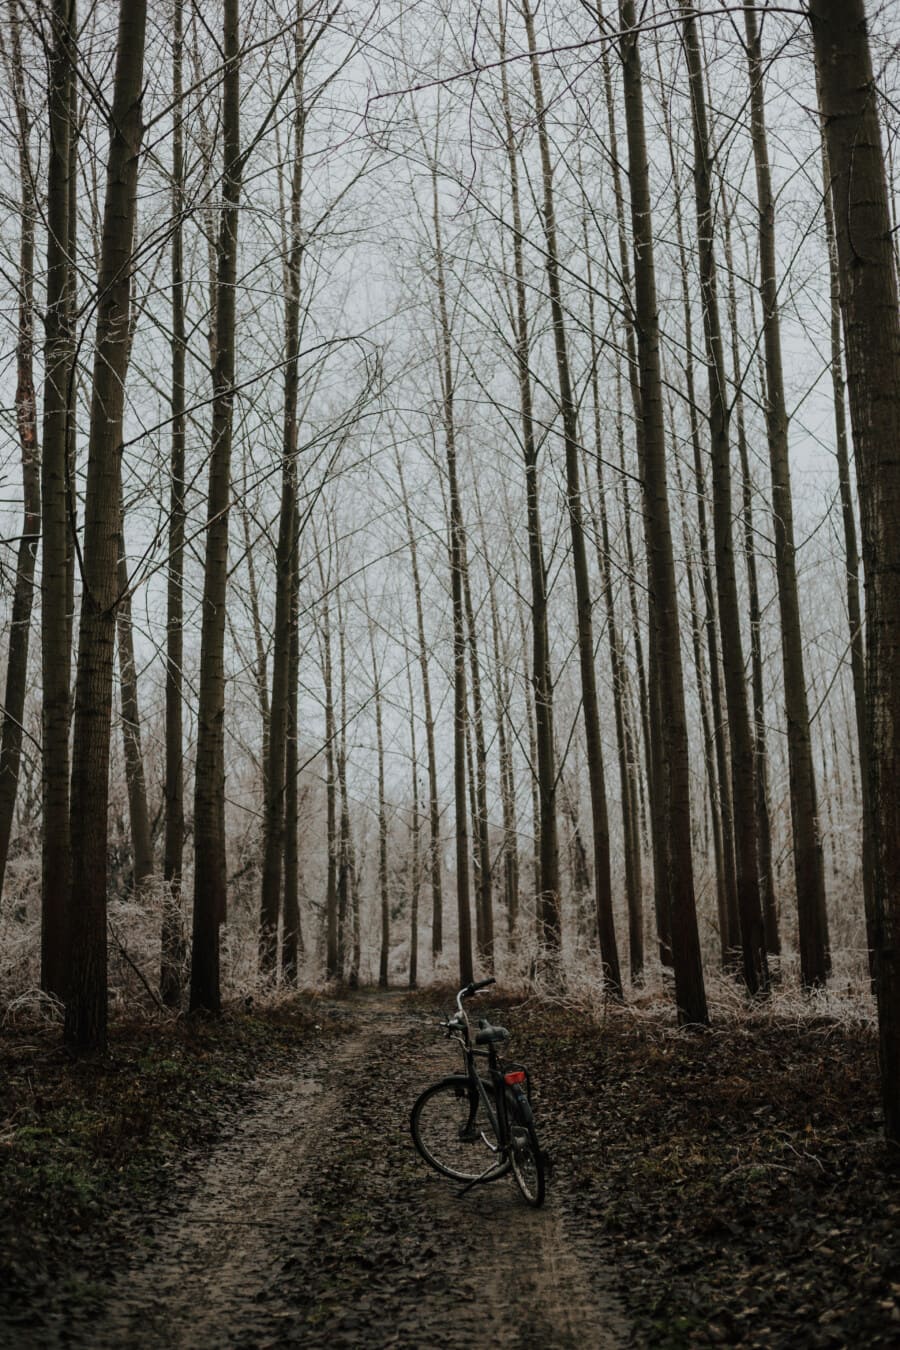 forest trail, forest, forest path, winter, bicycle, cold, branches, frozen, trees, poplar